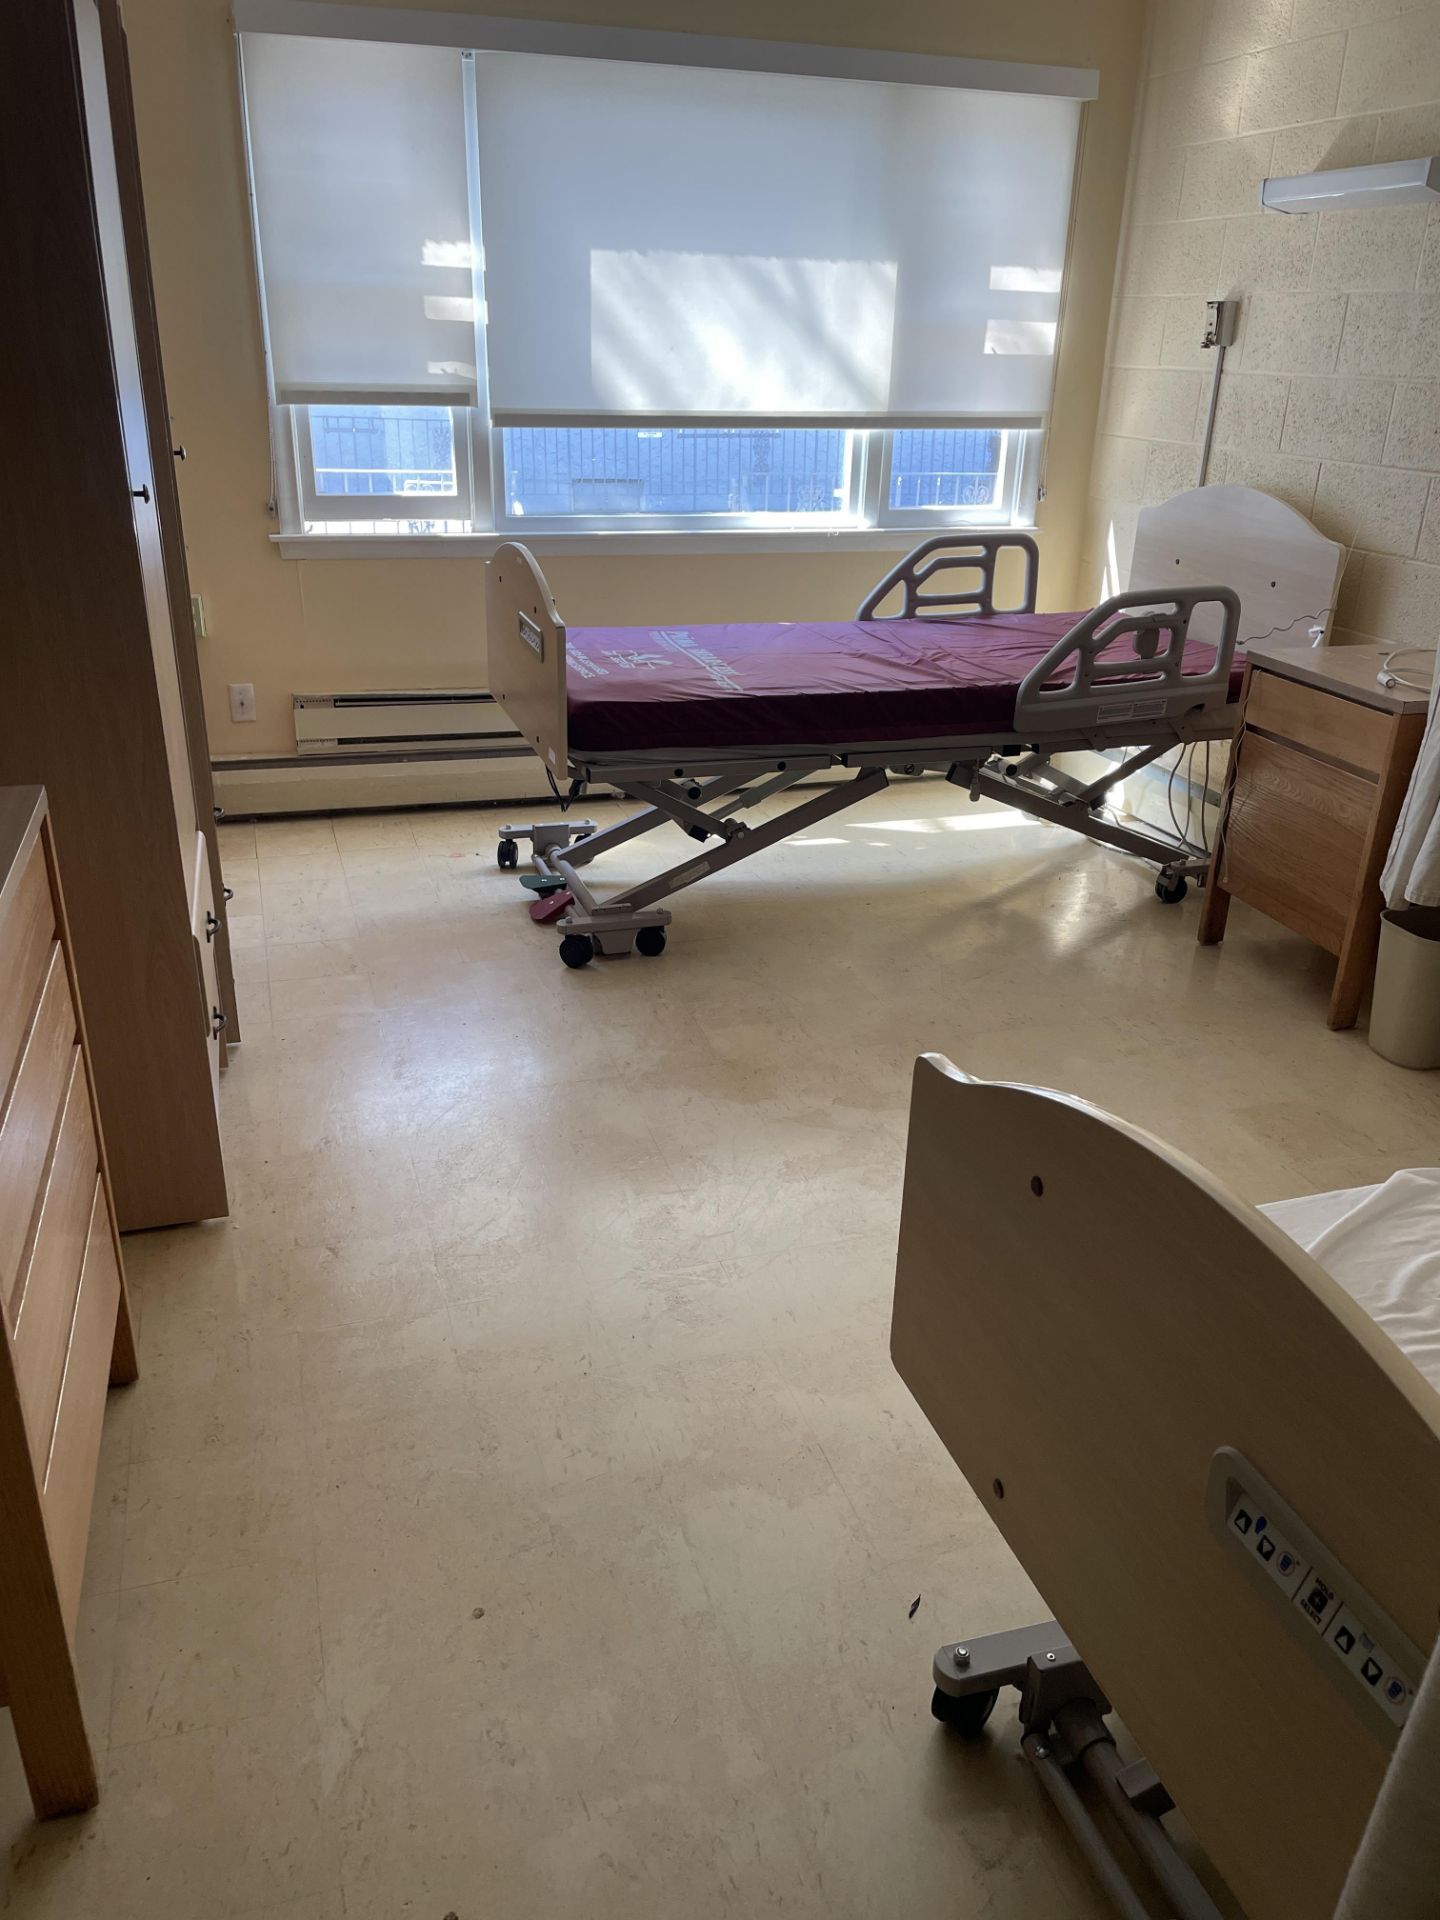 {LOT} In Wing in Standard Rehabilitation Room (23 Rooms - 1 to 23)) c/o: (23) Zenith 807 Series - Image 8 of 25